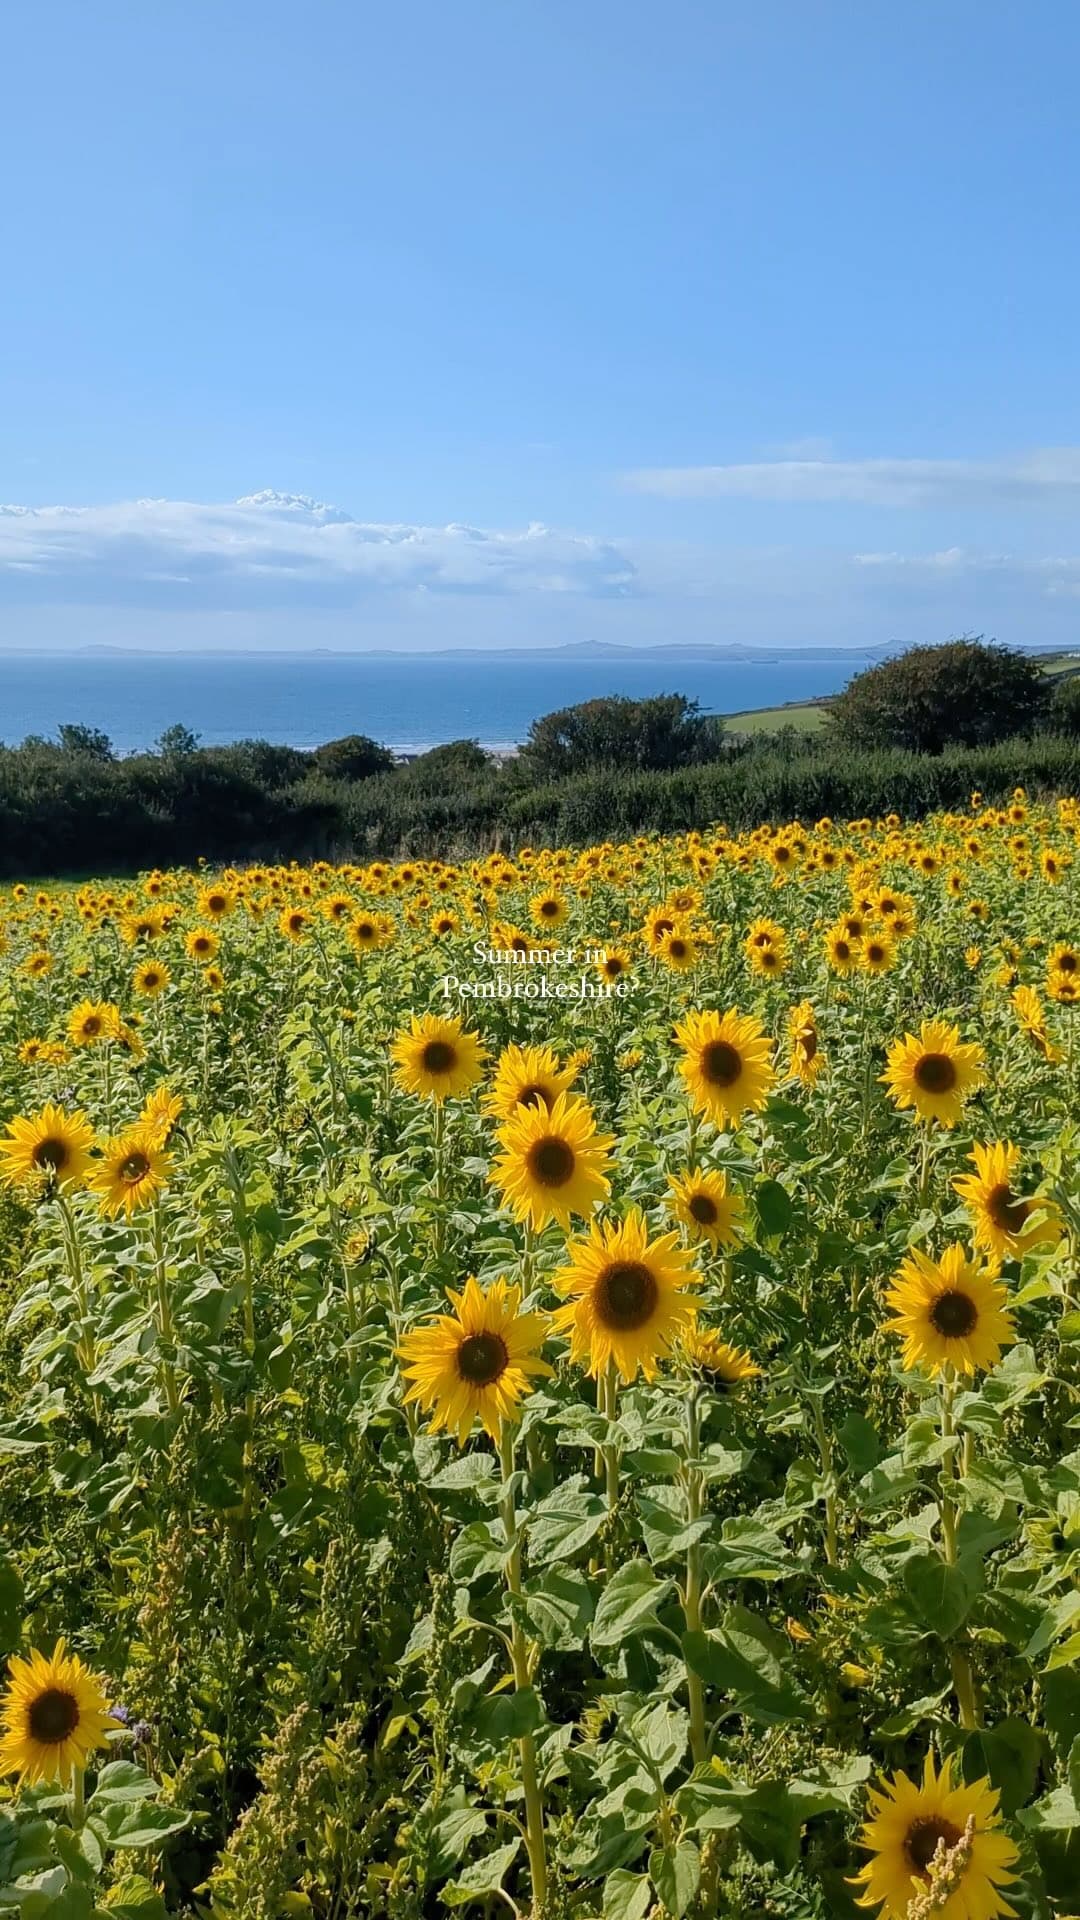 There’s nowhere we’d rather be… 🌊🌻🐚

Escape to the coast this summer, link in our bio 🌞

#summerbreaks #toddlerbreaks #visitpembrokeshire #visitwales #pembrokeshire